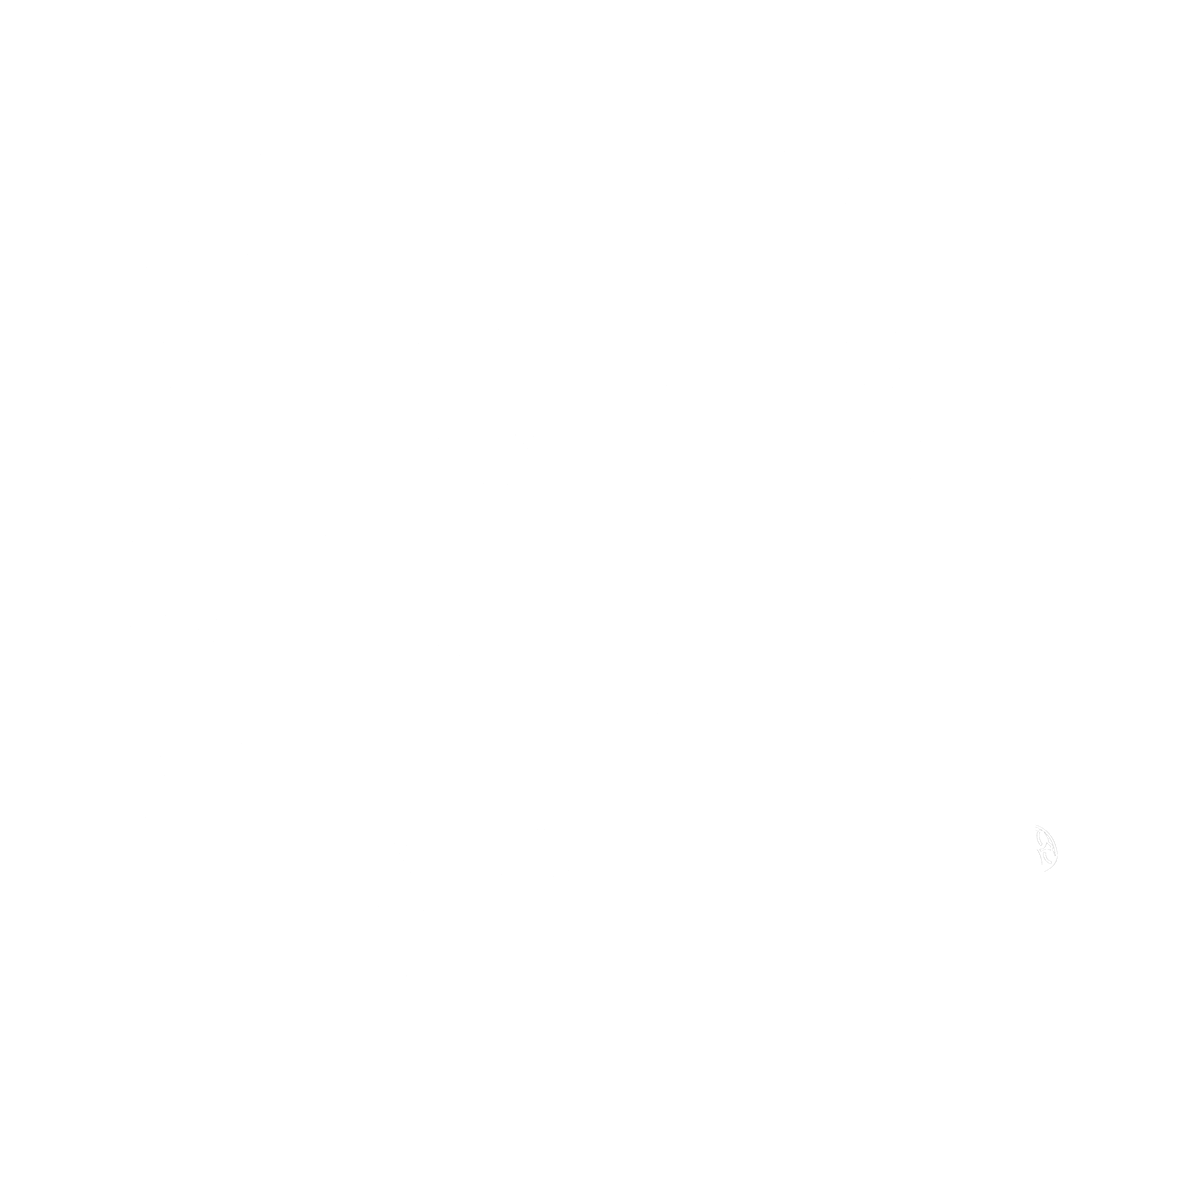 process flow Industrial Illustration vegetable protein